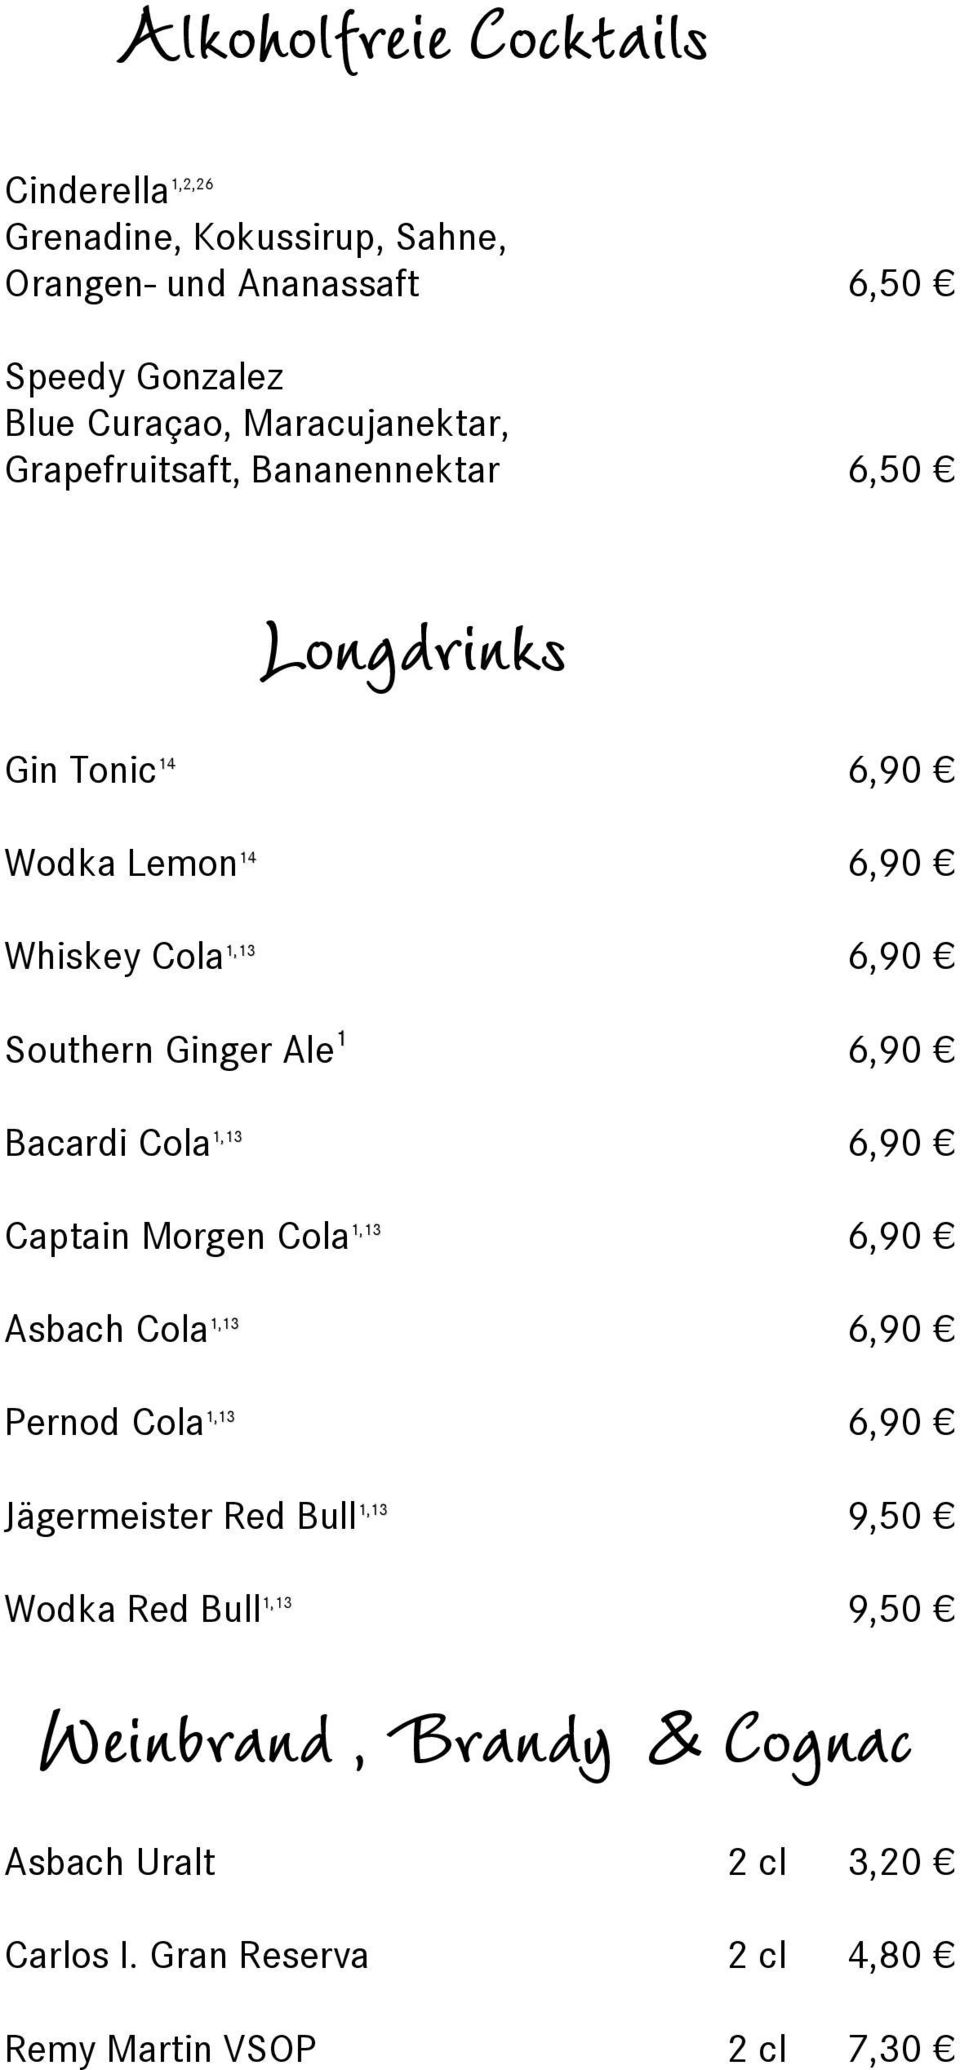 Southern Ginger Ale 1 6,90 Bacardi Cola 6,90 Captain Morgen Cola 6,90 Asbach Cola 6,90 Pernod Cola 6,90 Jägermeister Red Bull